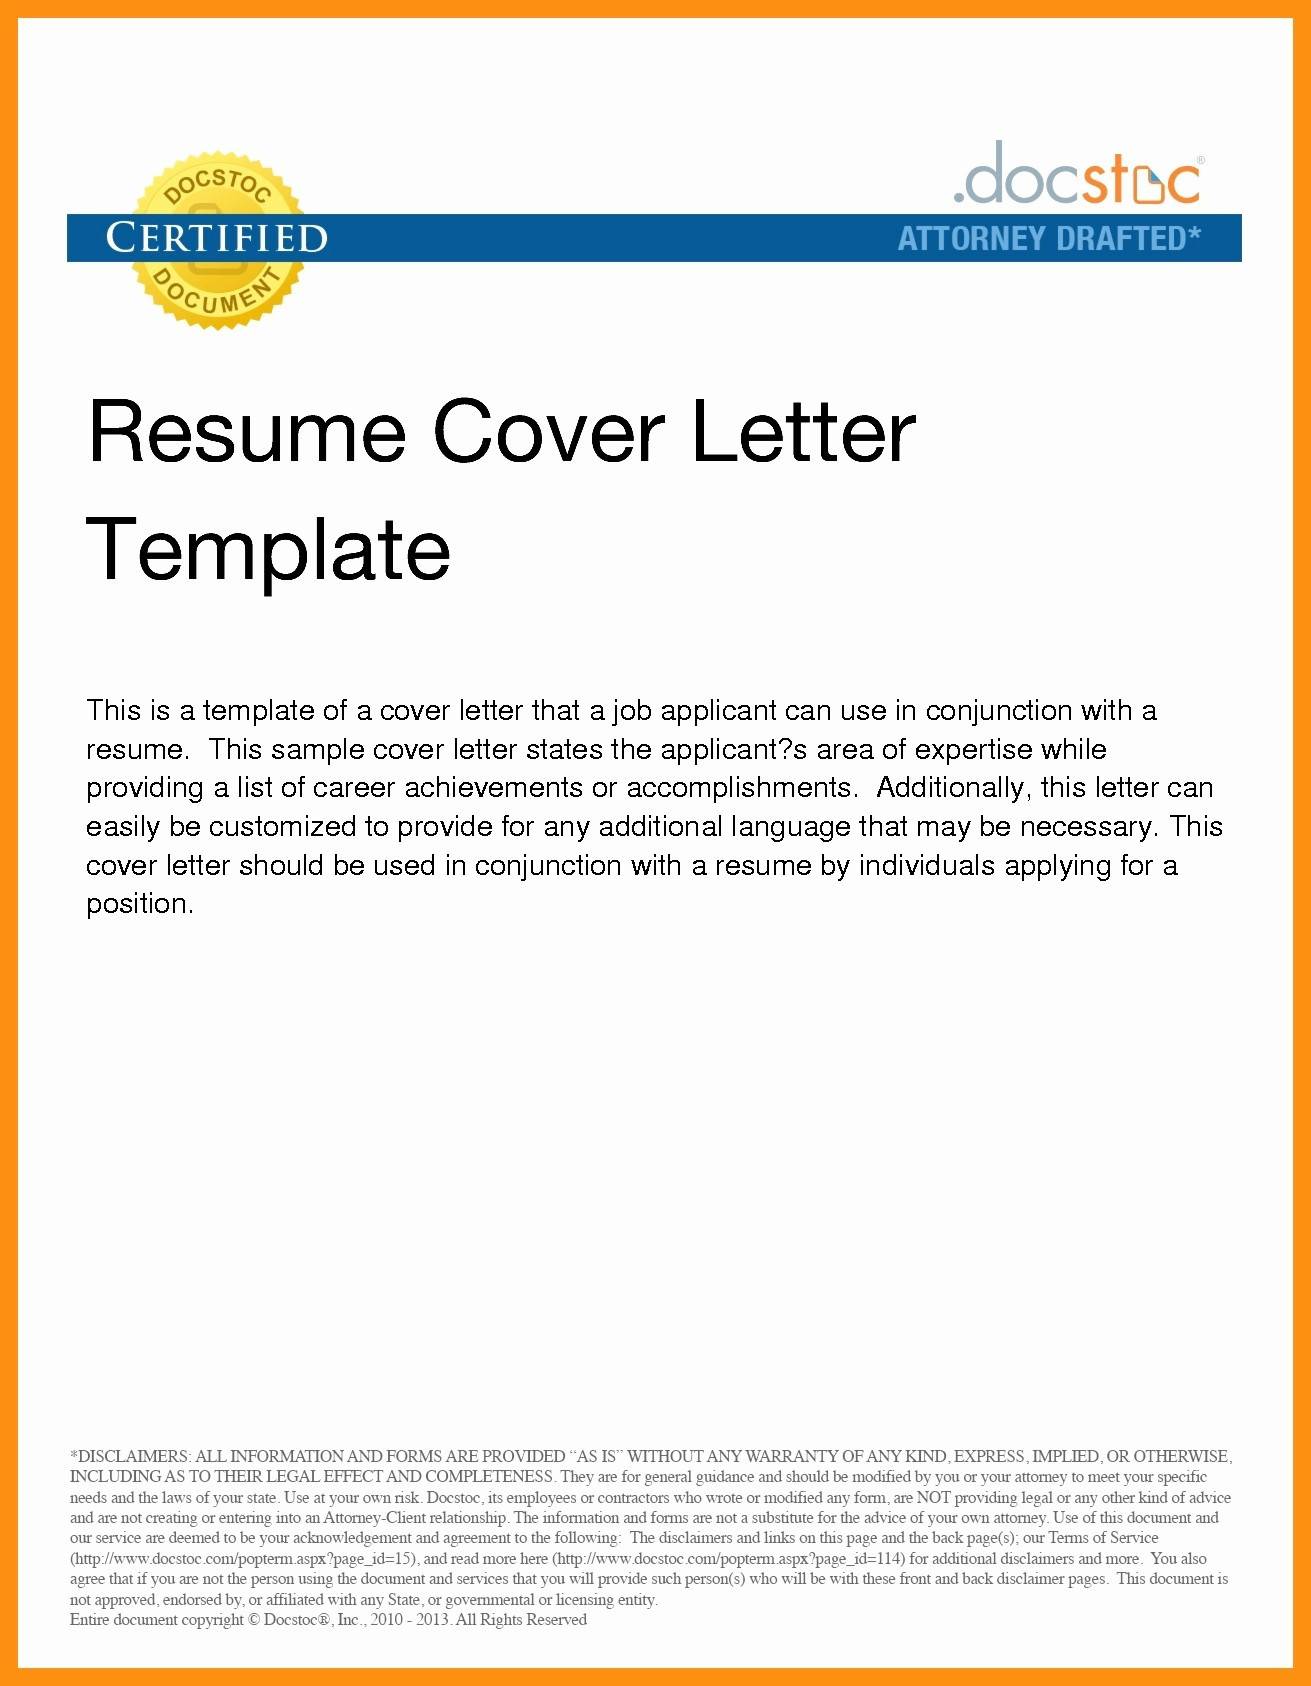 sending resume and cover letter by email collection